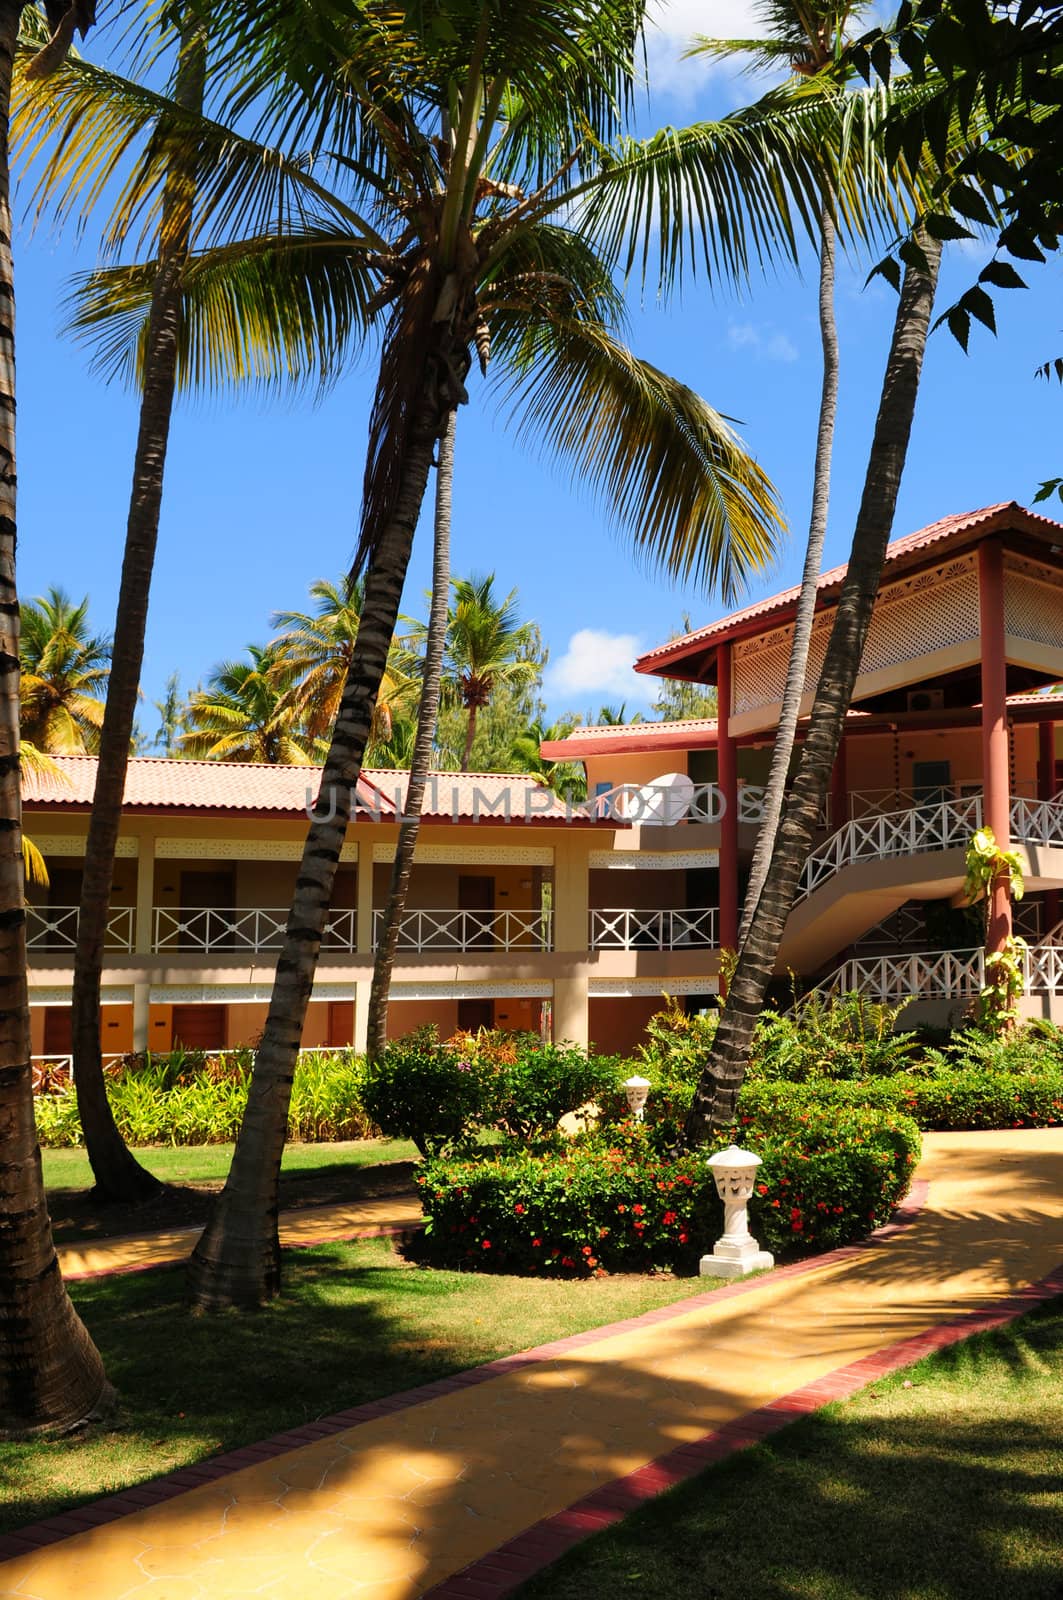 Luxury hotel at tropical resort with palm trees